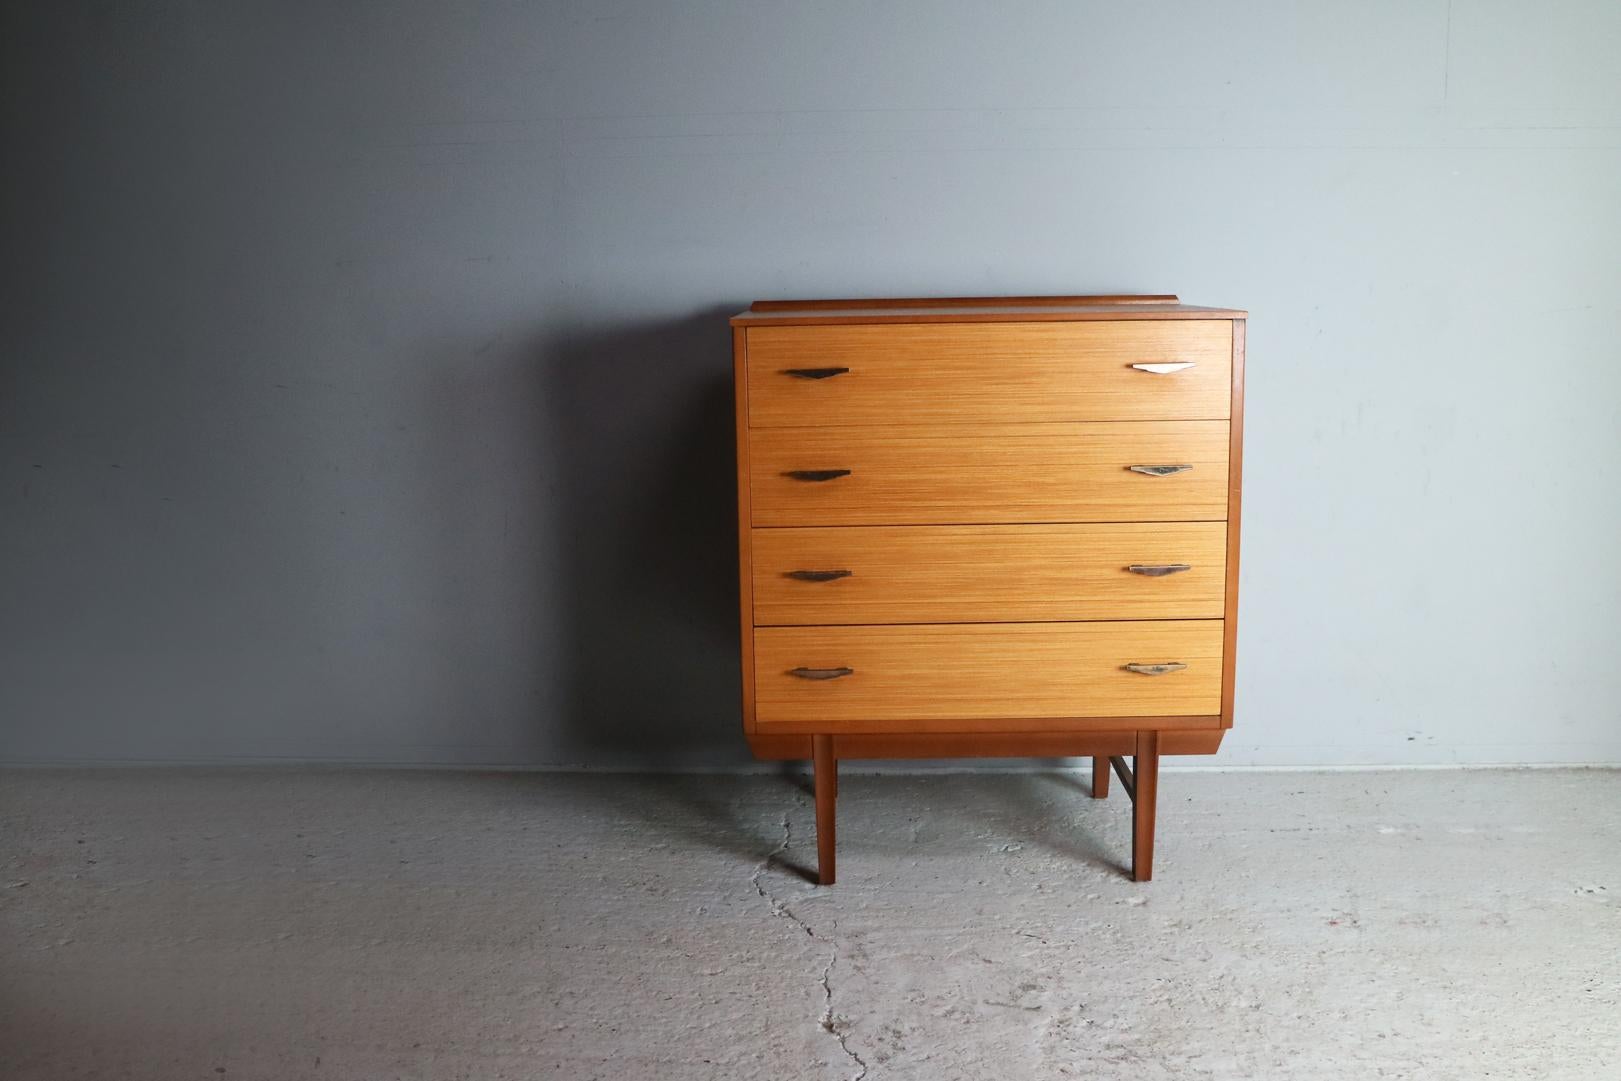 A chest of drawers very French in style. With light teak veneered drawers with a contrasting surround in darker teak. Nicely shaped brass plate handles. A very elegant piece.